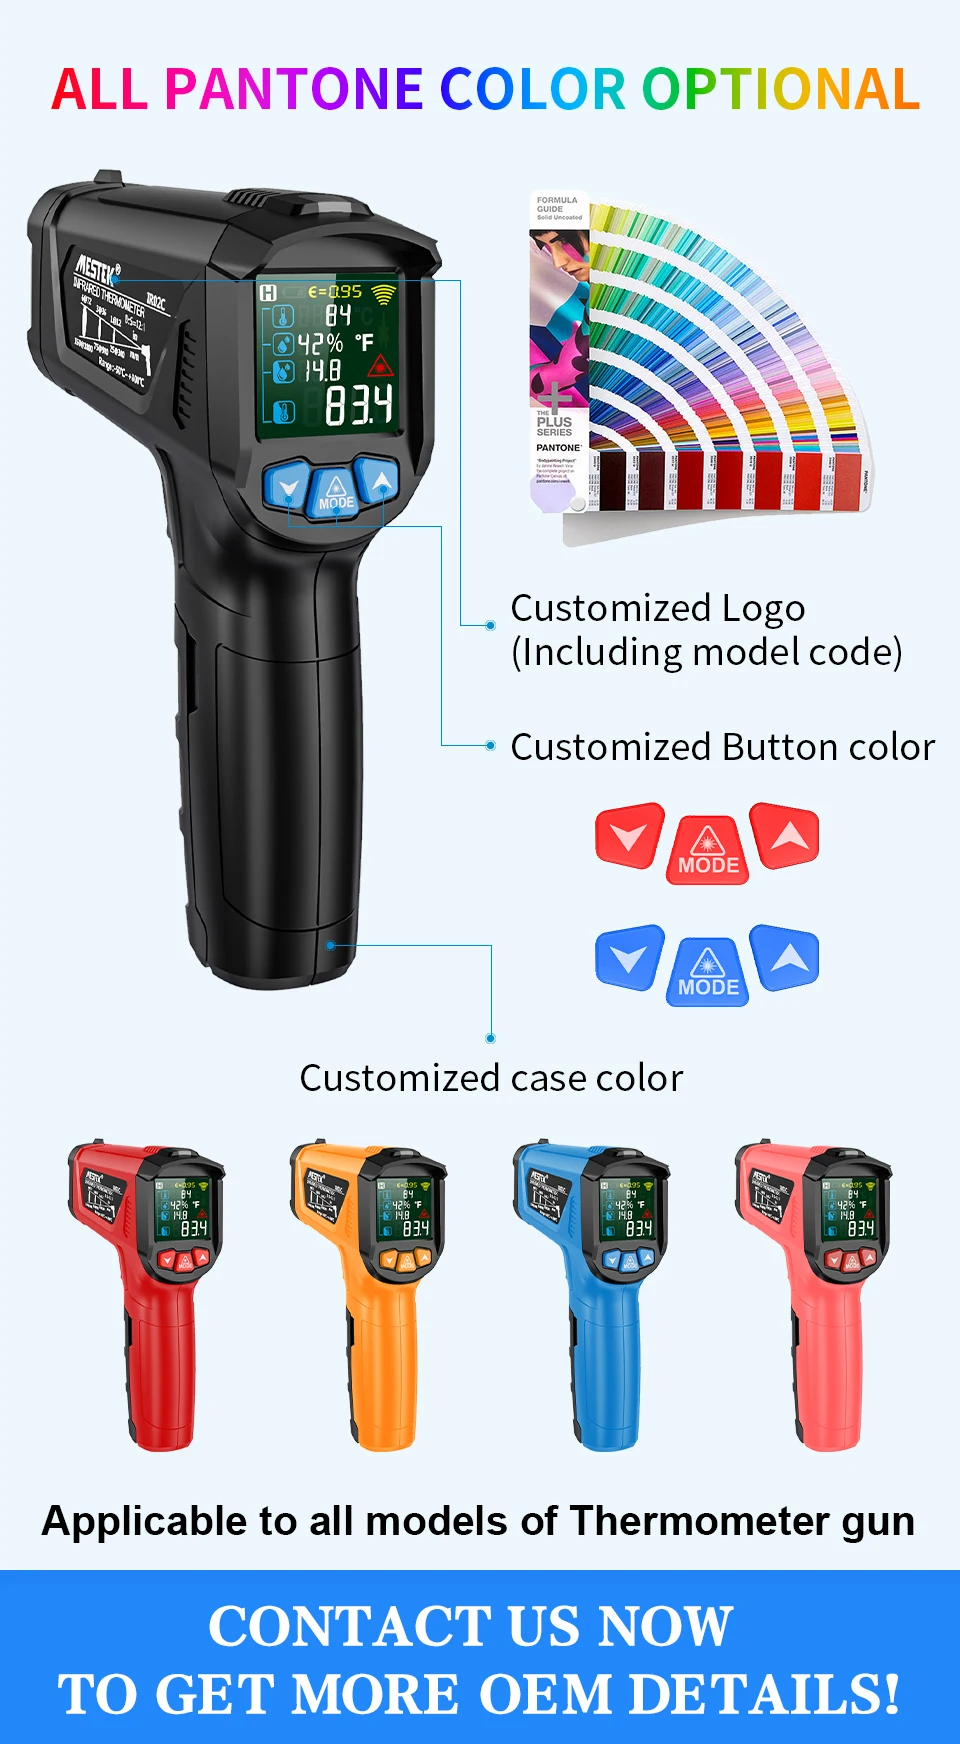 Mechpro Infrared Thermometer - MPIRT - Mechpro Tools